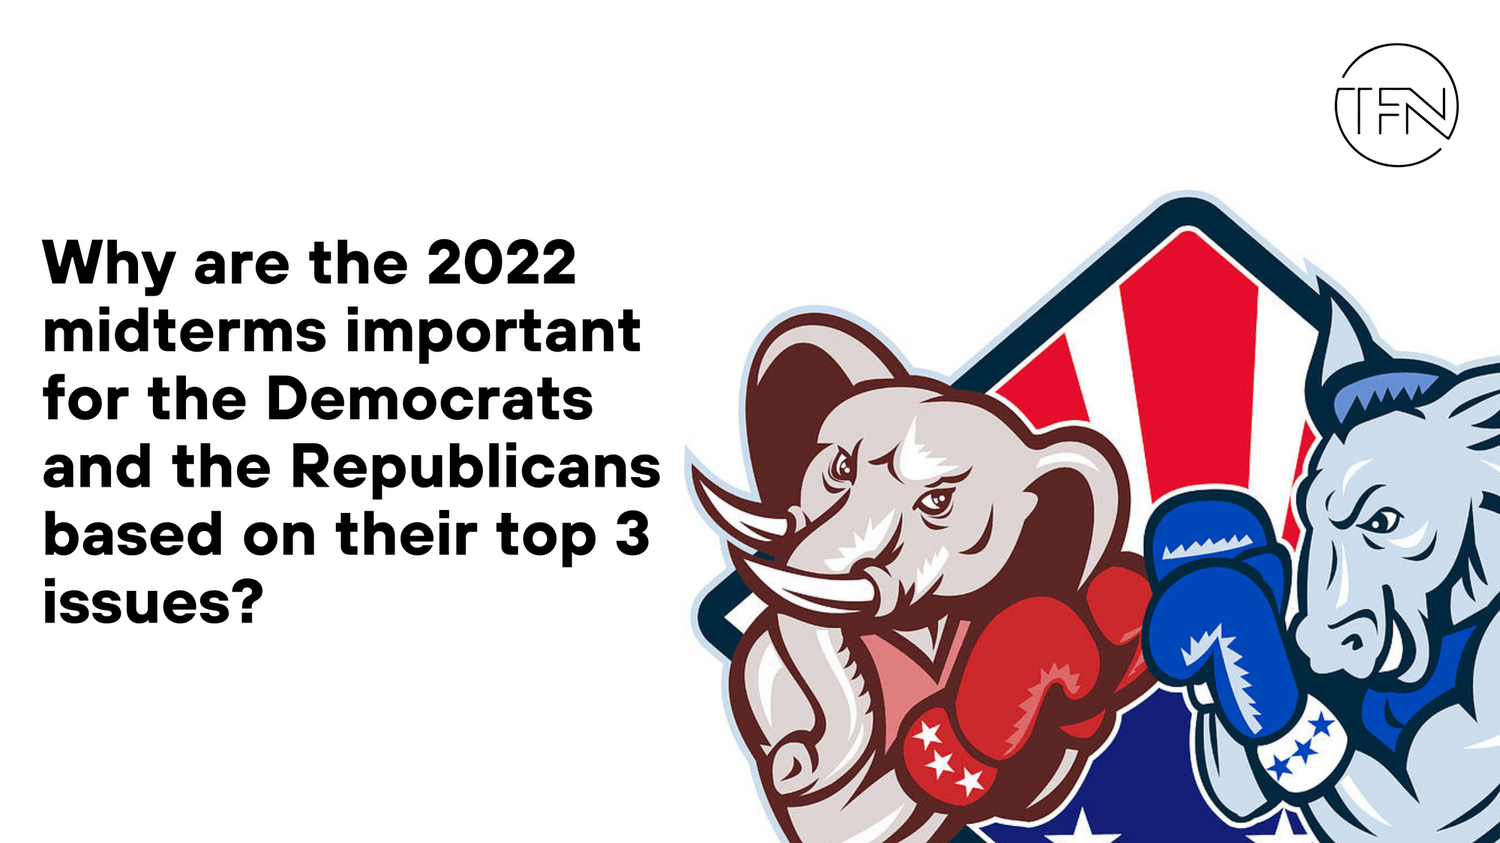 Why are the 2022 midterms important for the Democrats and the Republicans based on their top 3 issues?